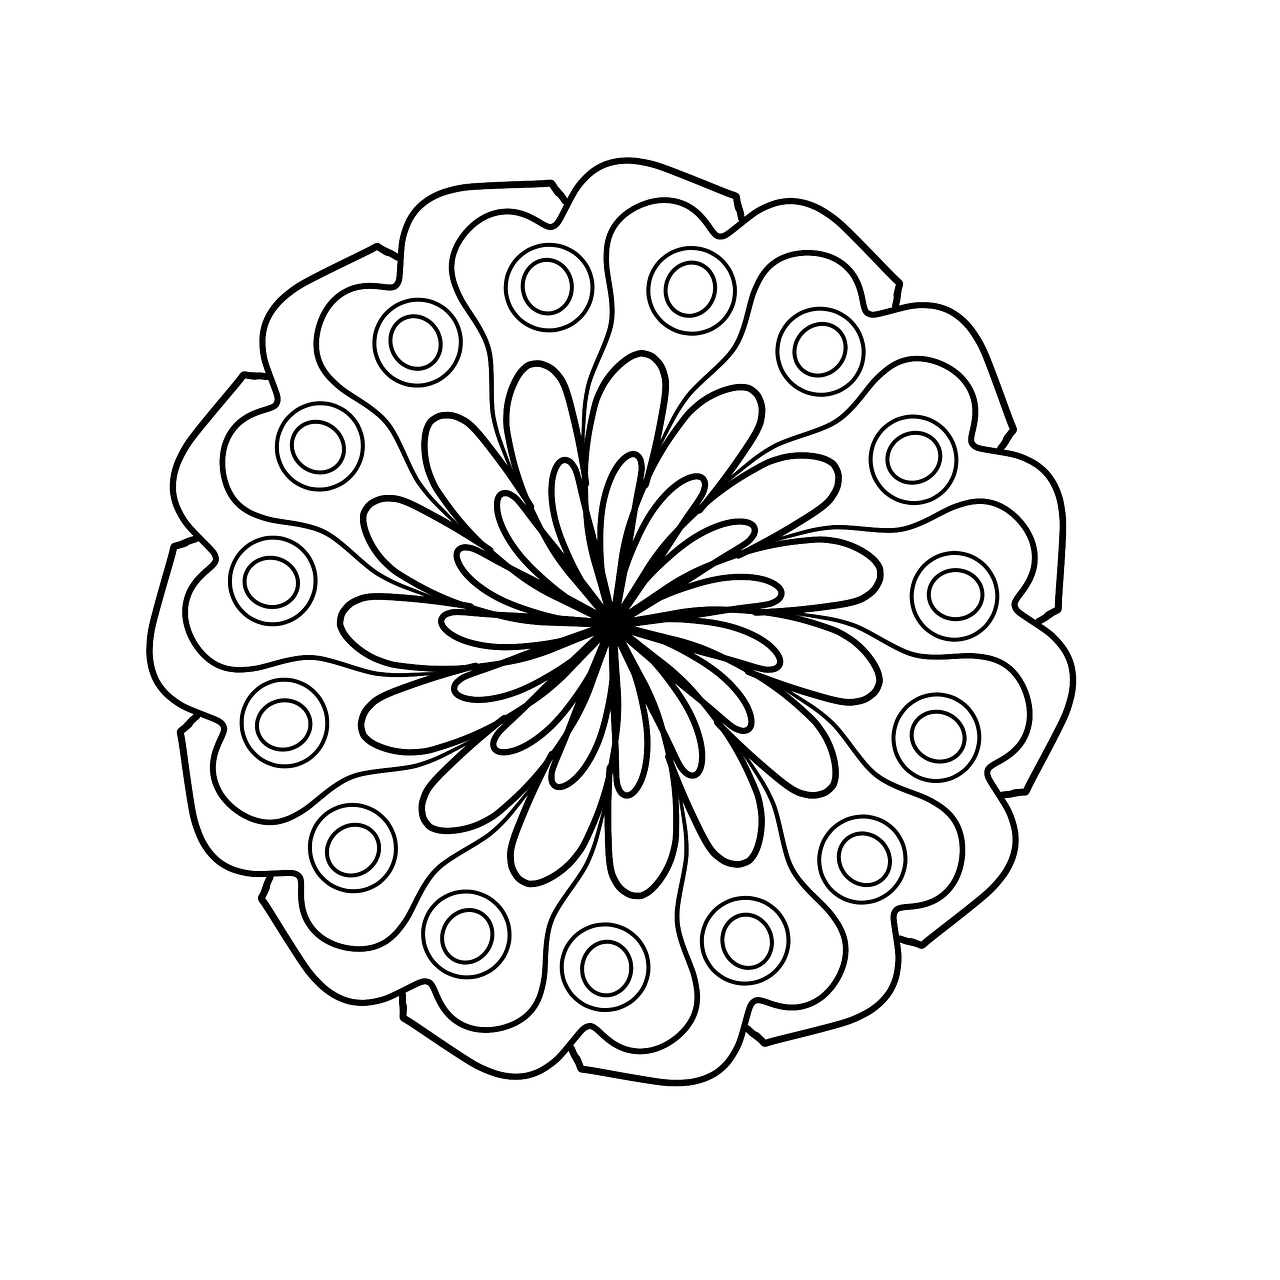 Download free photo of Mandala,coloring page,coloring for adults ...